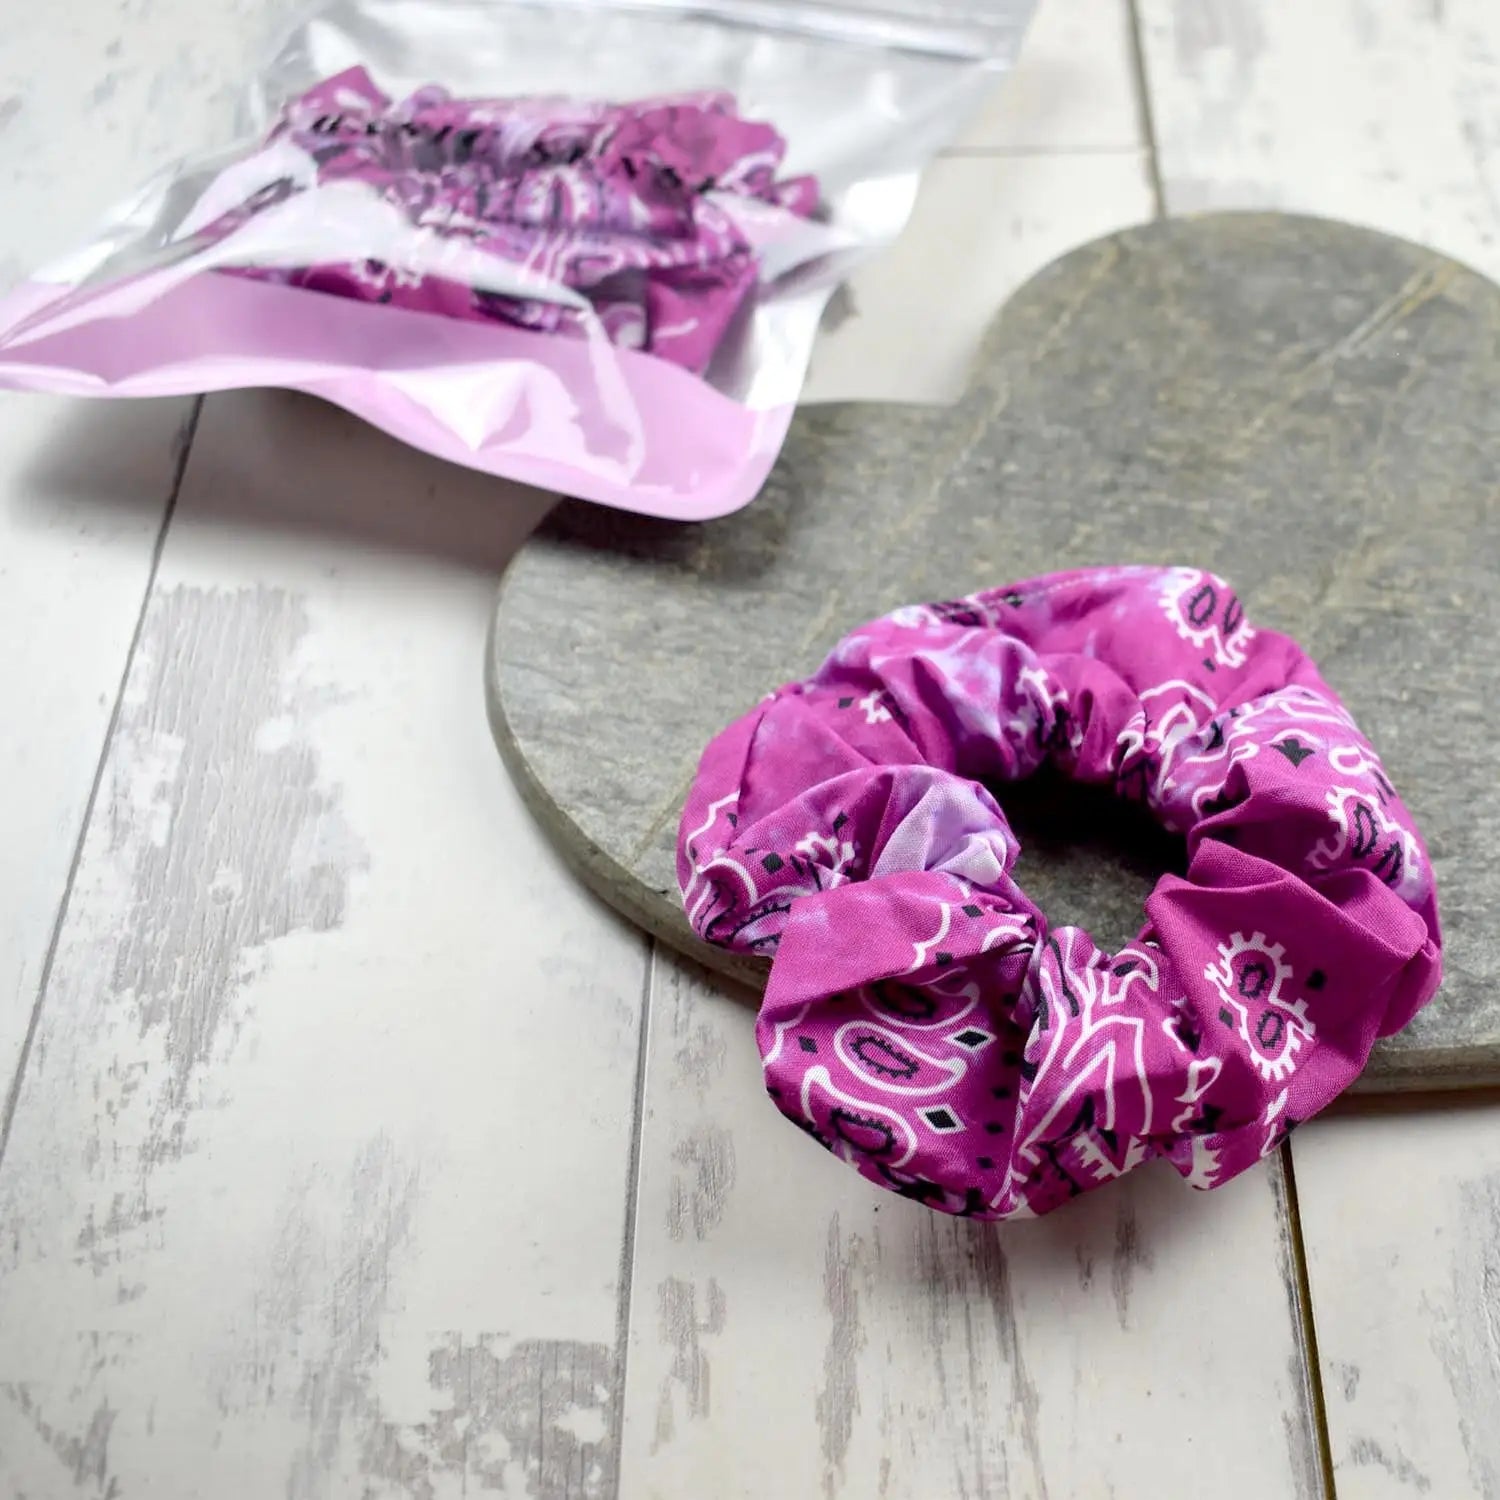 Vibrant pink paisley-patterned scrunchie displayed on a stone heart, with a clear plastic bag alongside.